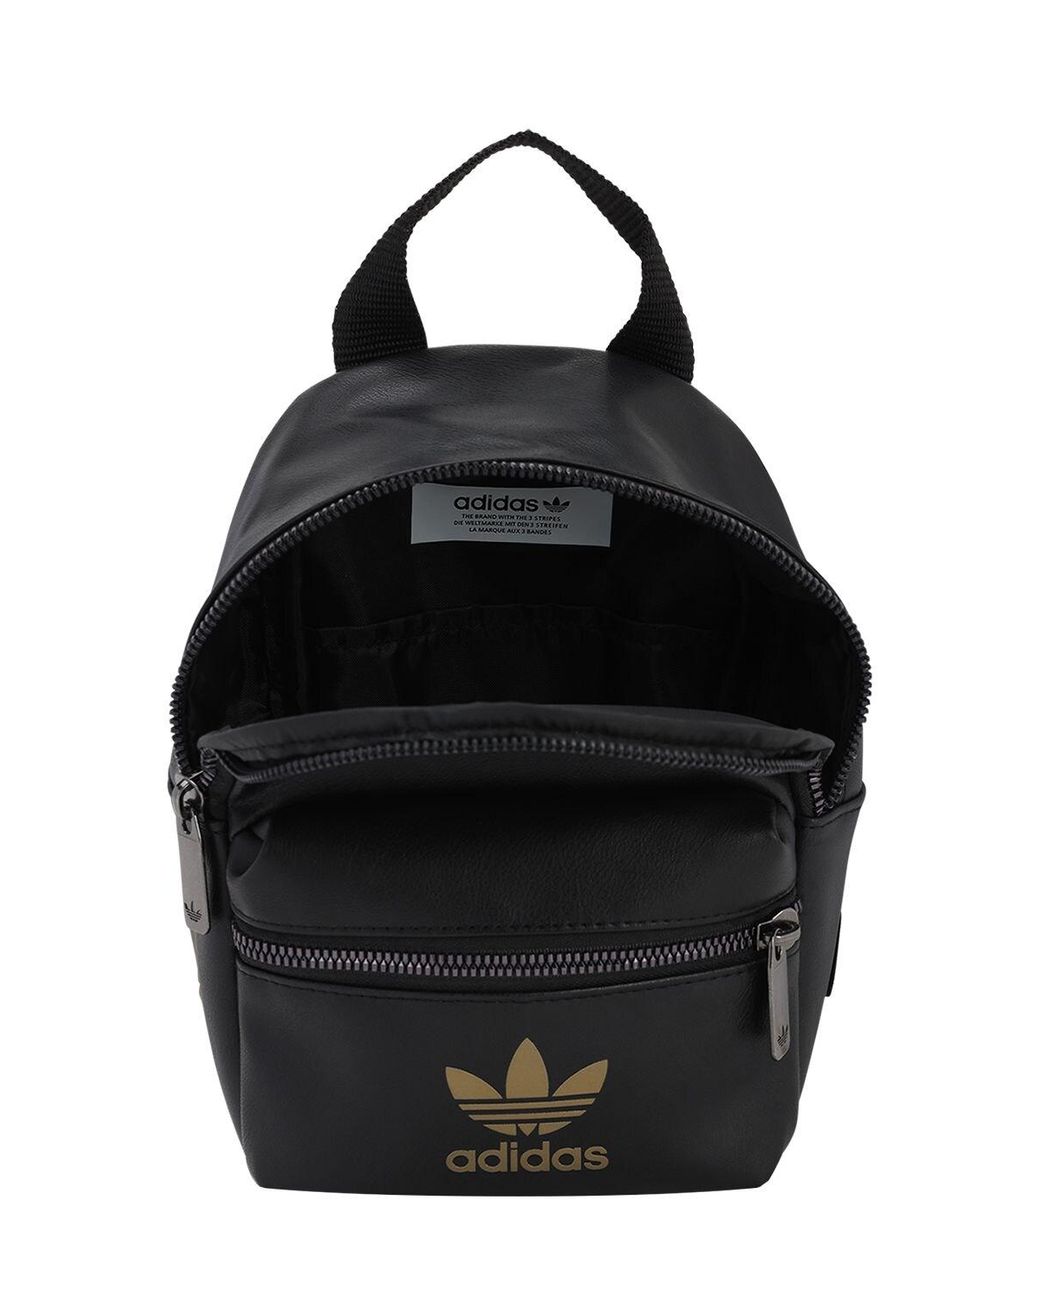 adidas originals mini backpack in white faux leather